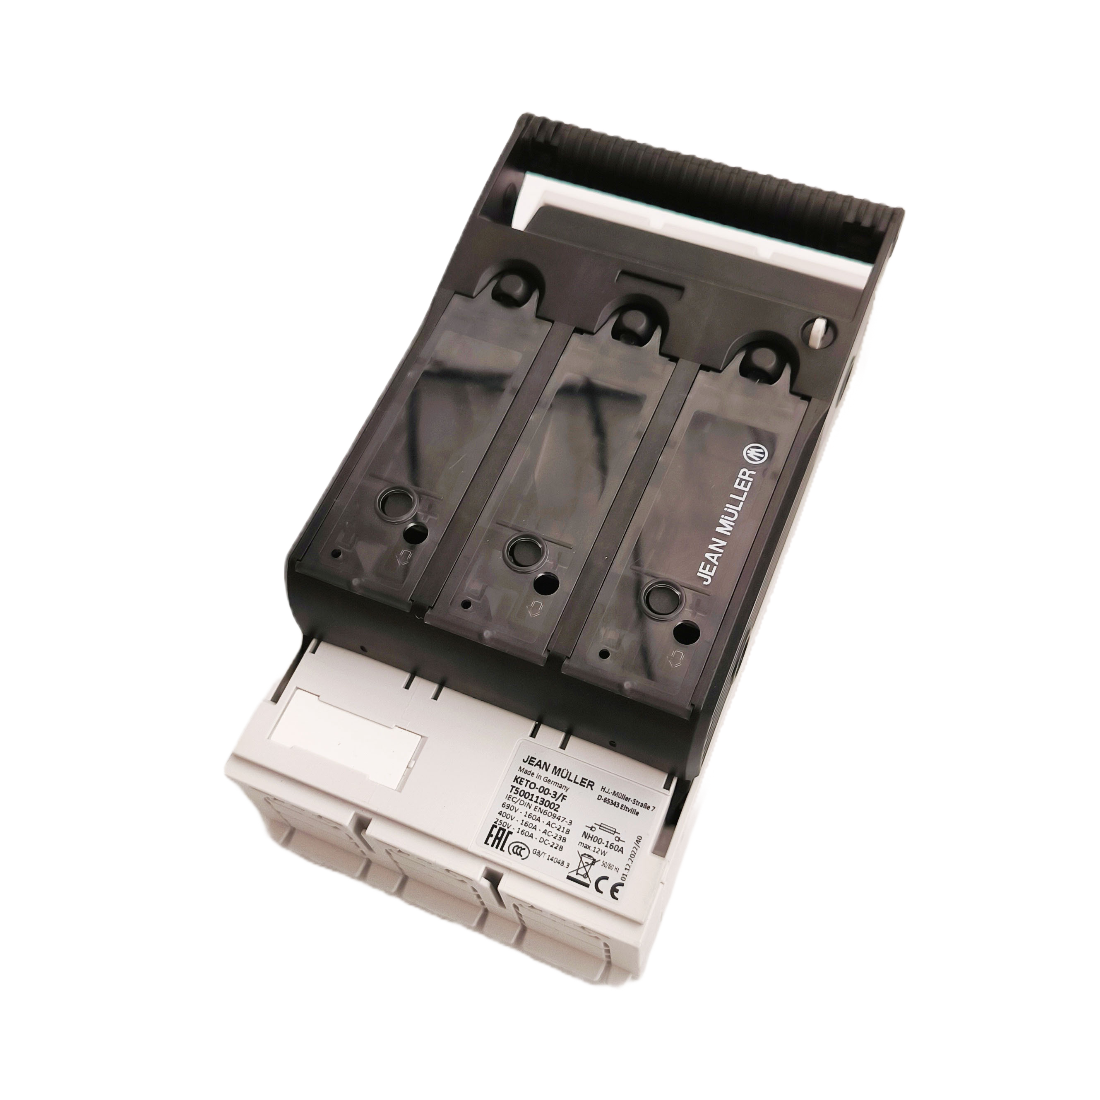 Jean Muller KETO-00 Battery Disconnector with 40A Fuses